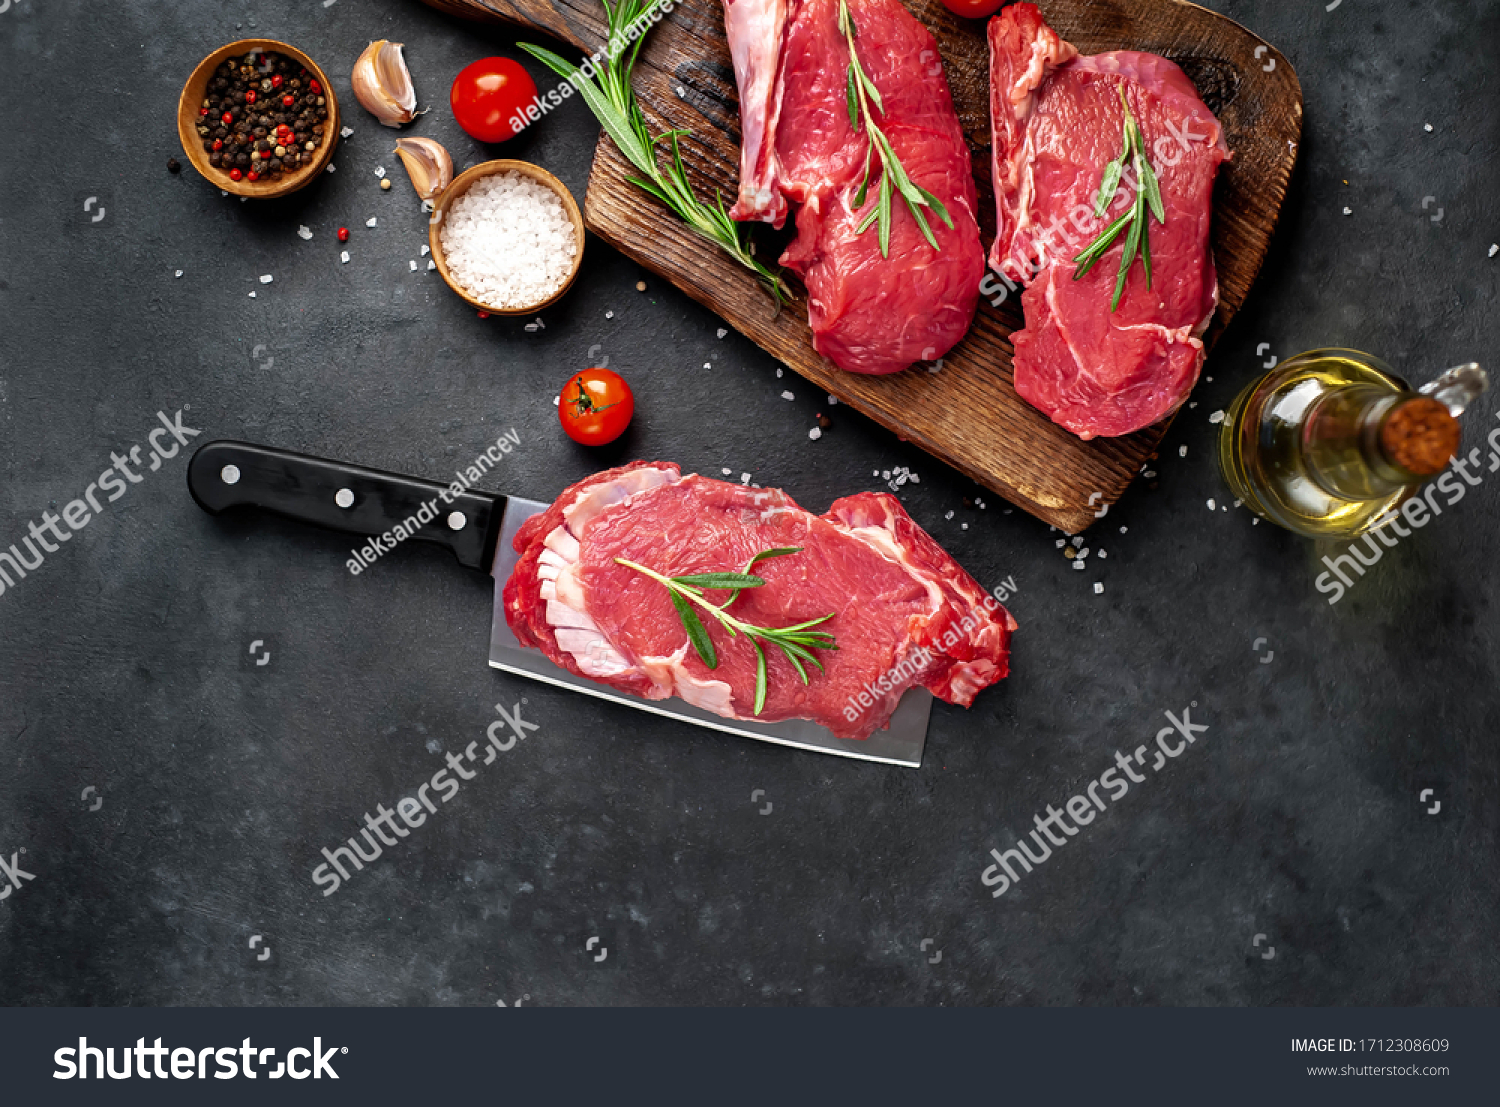 
raw three beef steaks on a cutting board with spices on a stone background #1712308609